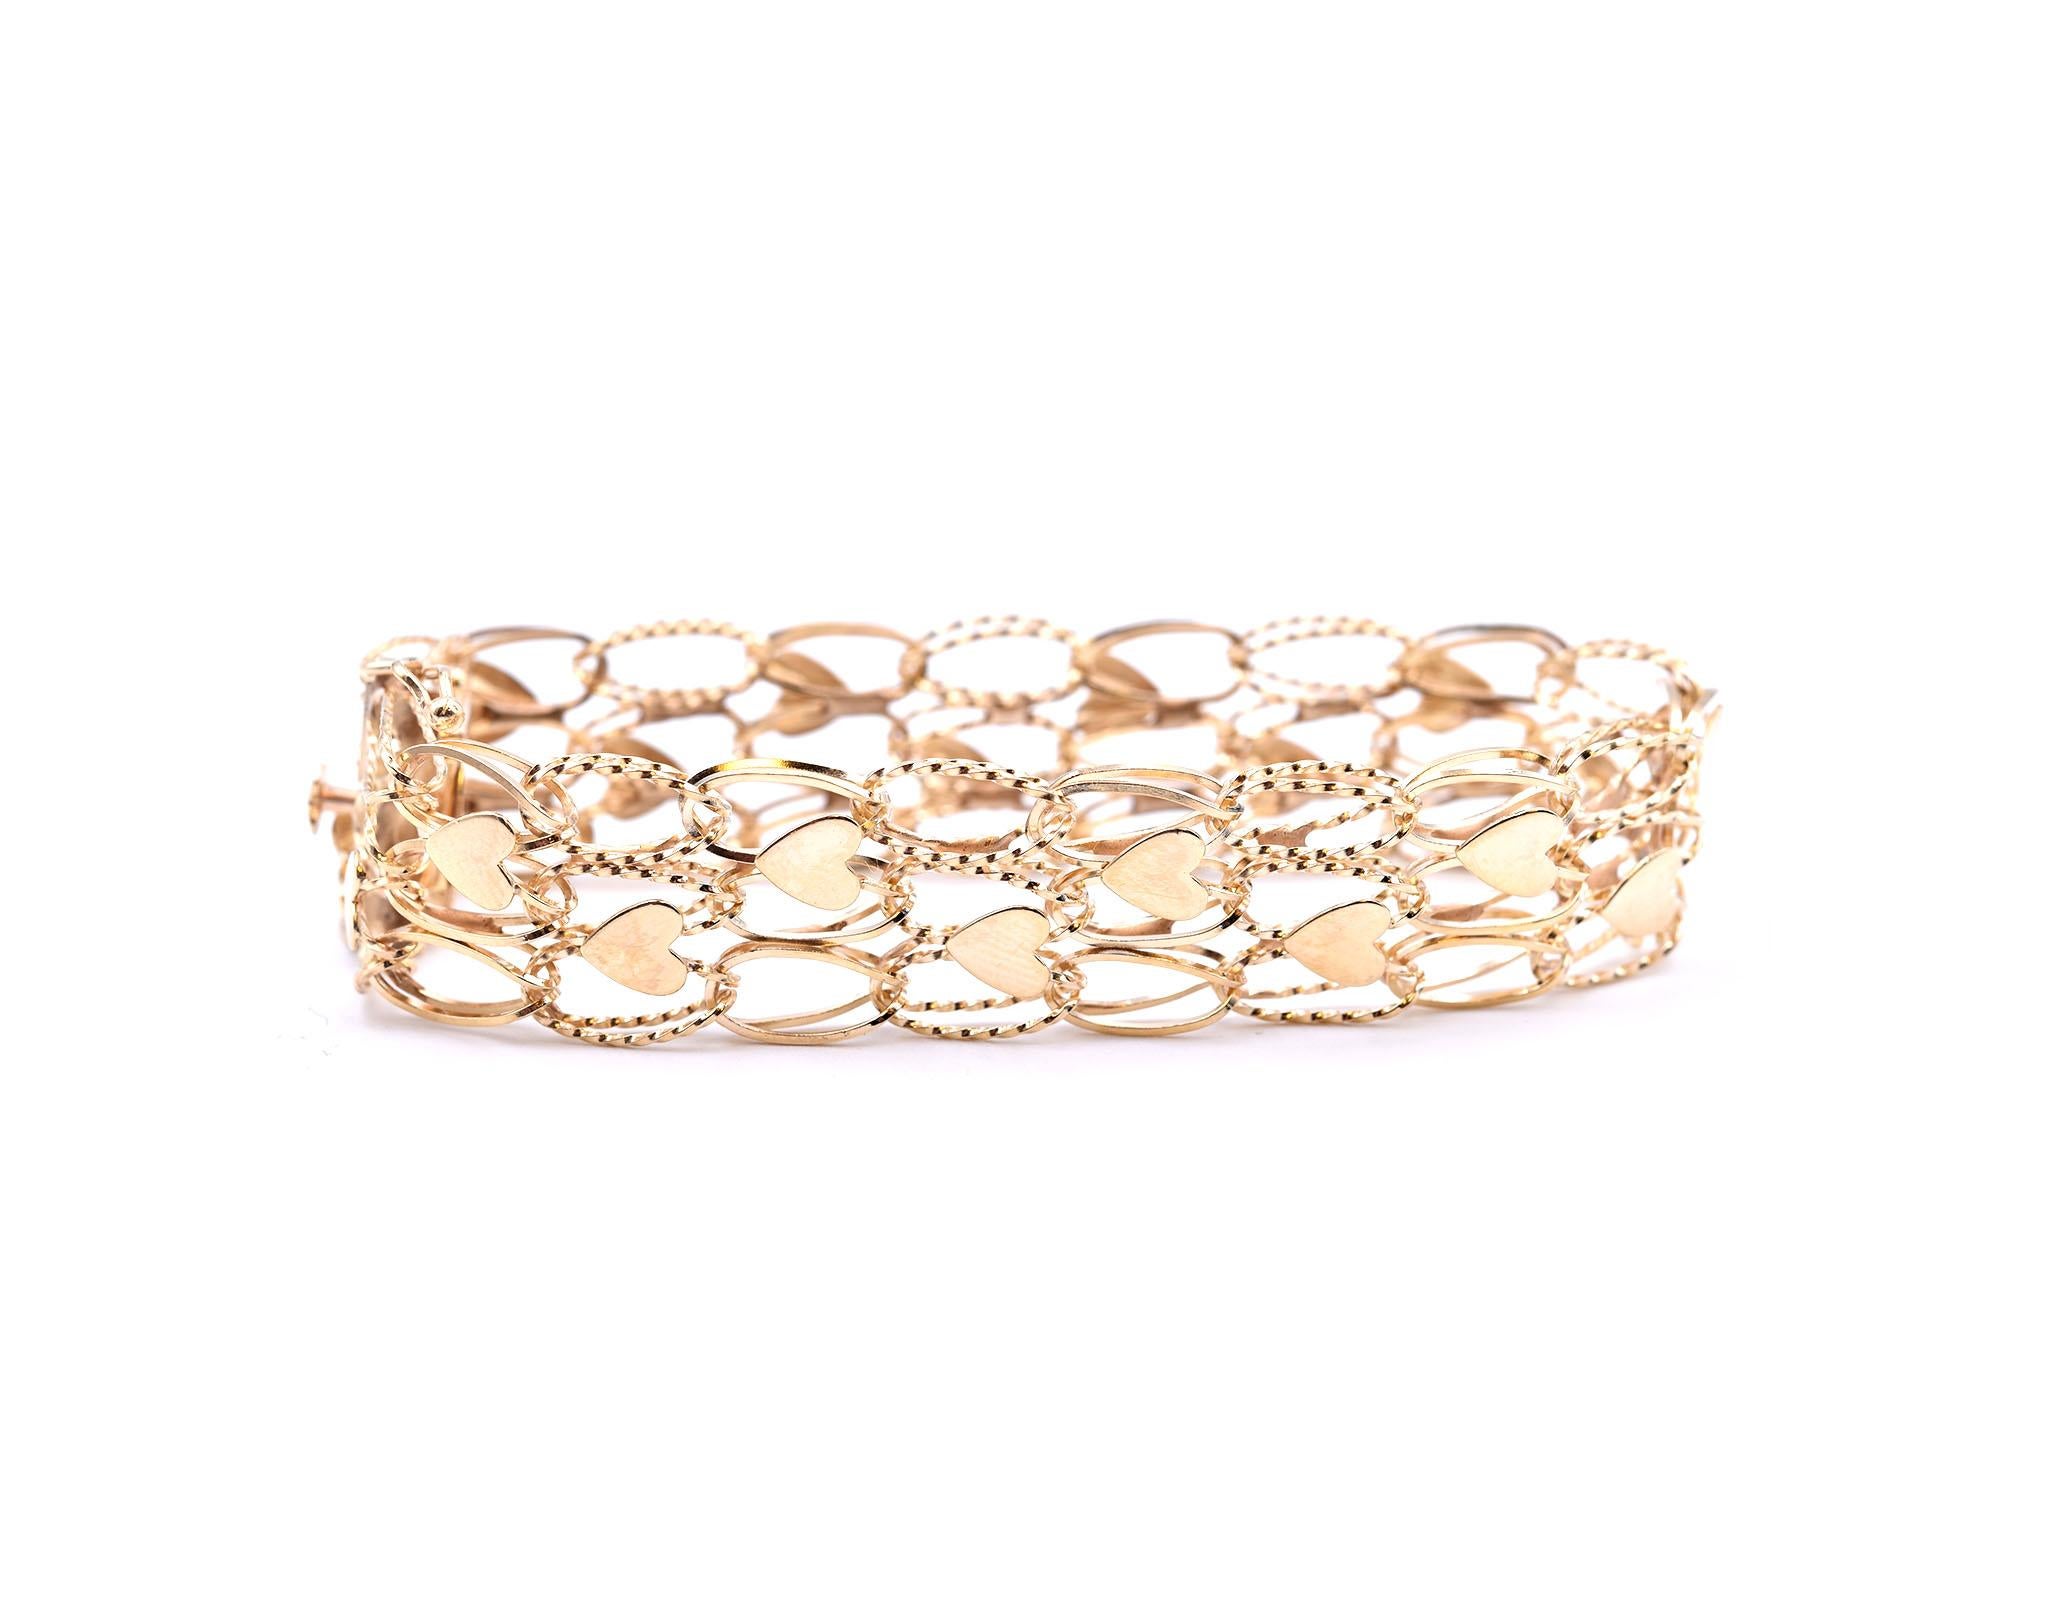 Designer: custom design
Material: 14k yellow gold
Dimensions: bracelet is 7-inches long and 15.70mm wide
Weight: 17.8 grams
